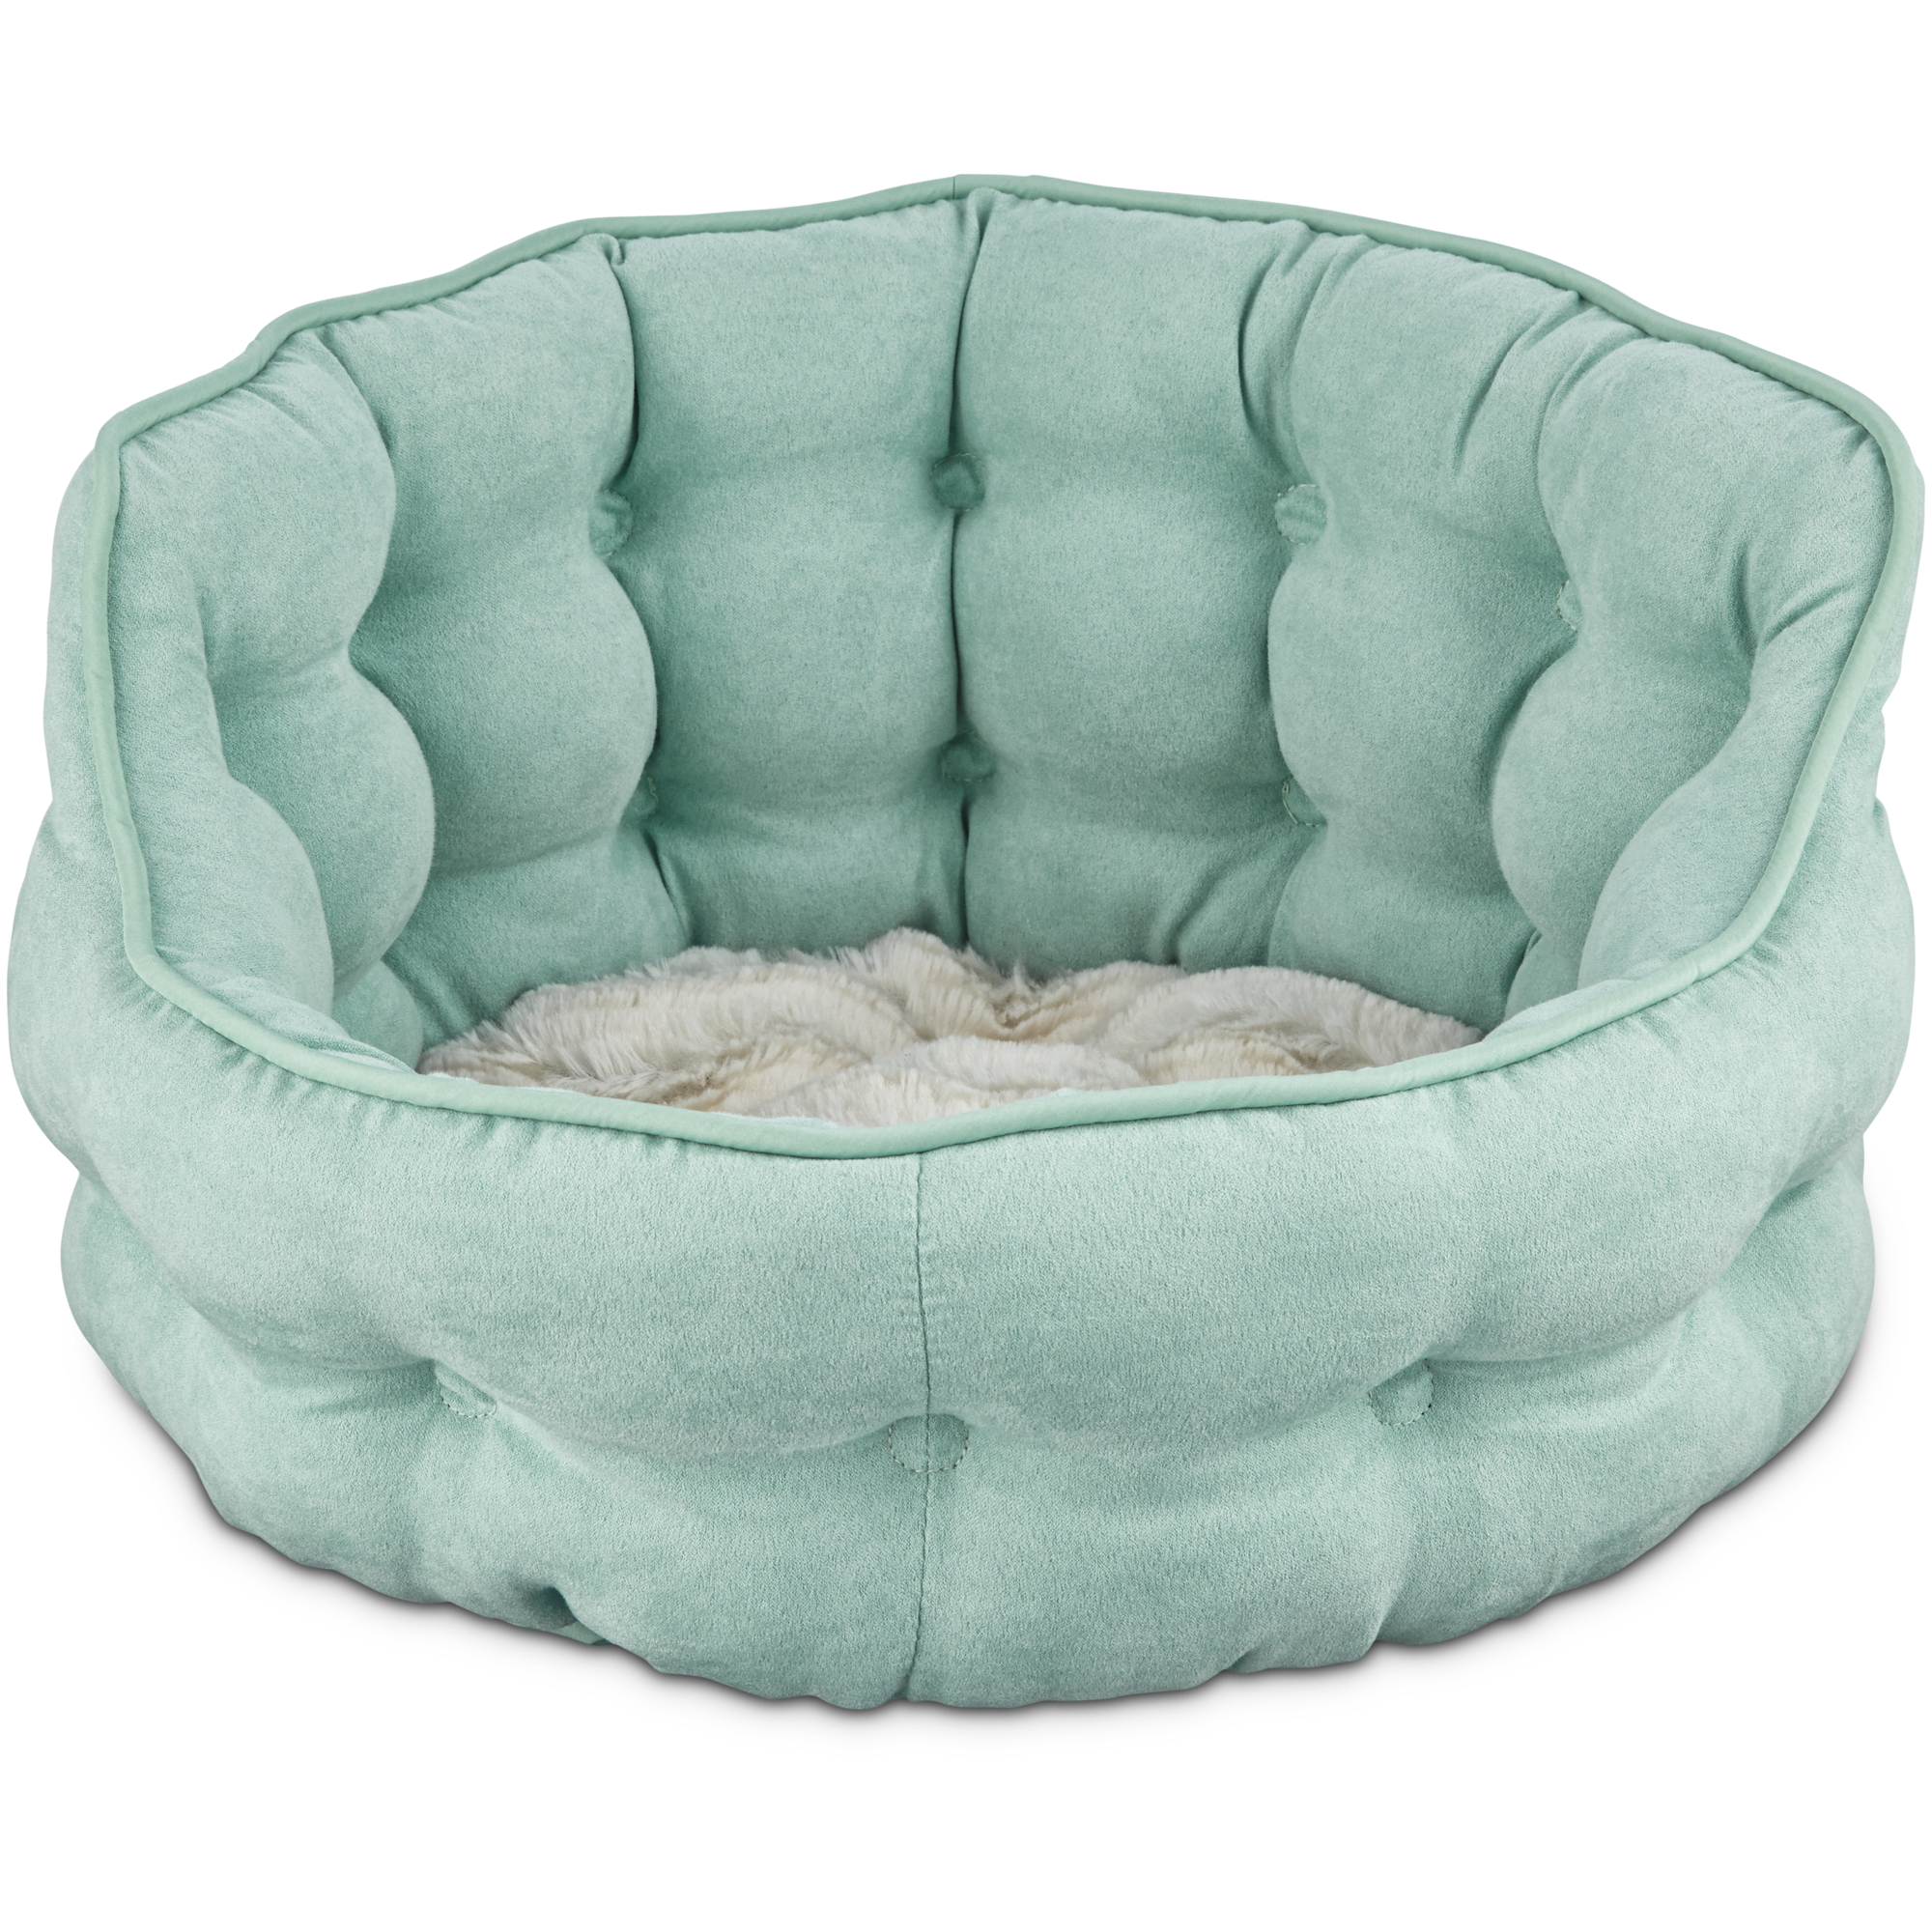 Harmony Tufted Cat Bed in Seaglass, 18 